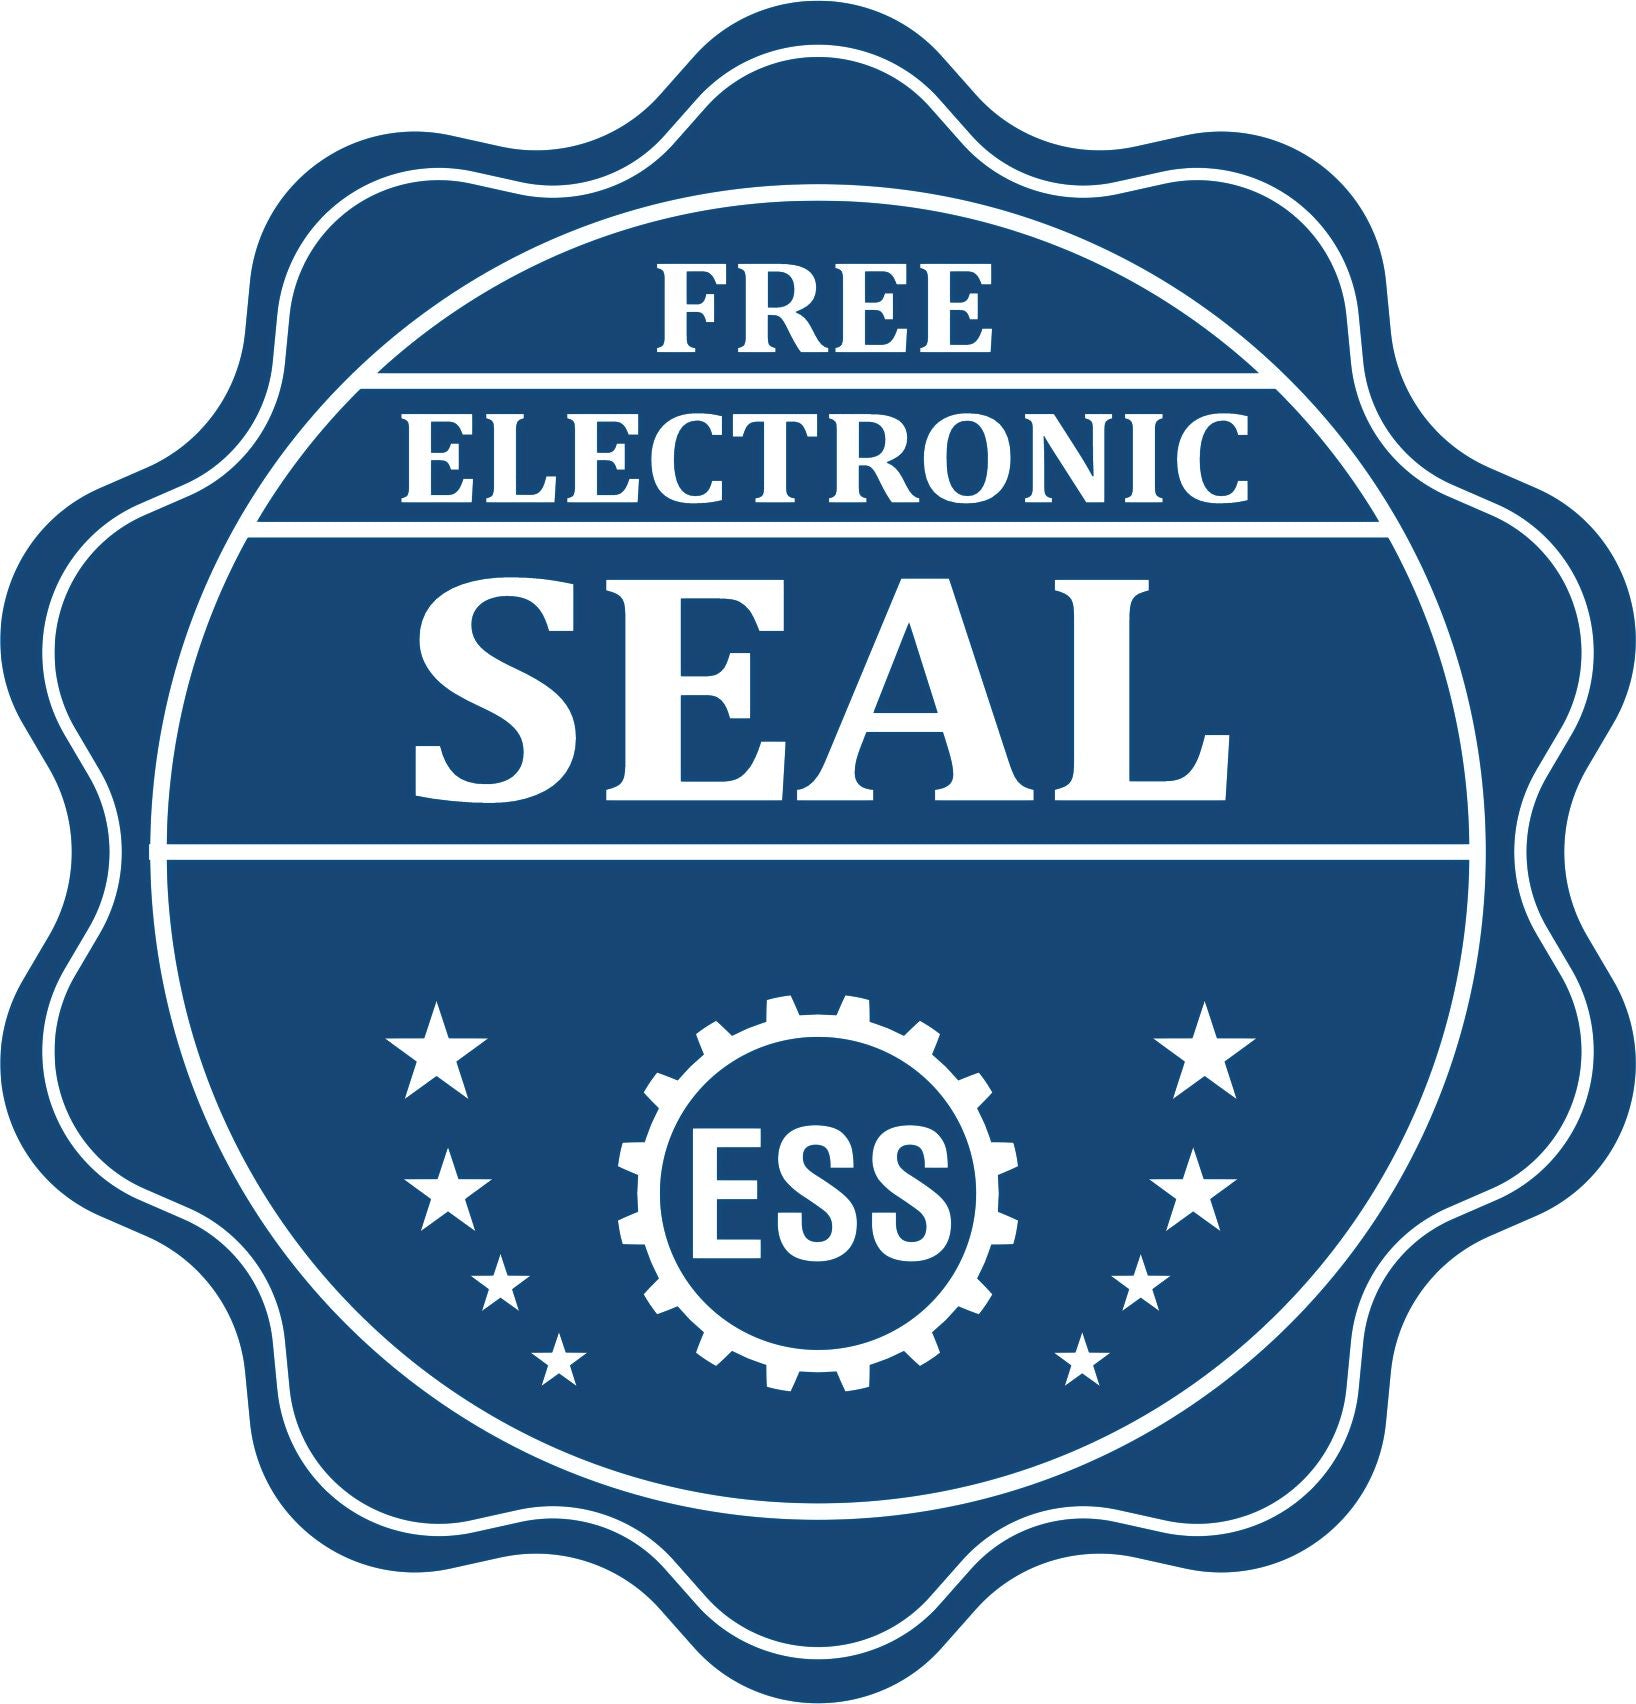 A badge showing a free electronic seal for the Slim Pre-Inked Louisiana Professional Engineer Seal Stamp with stars and the ESS gear on the emblem.